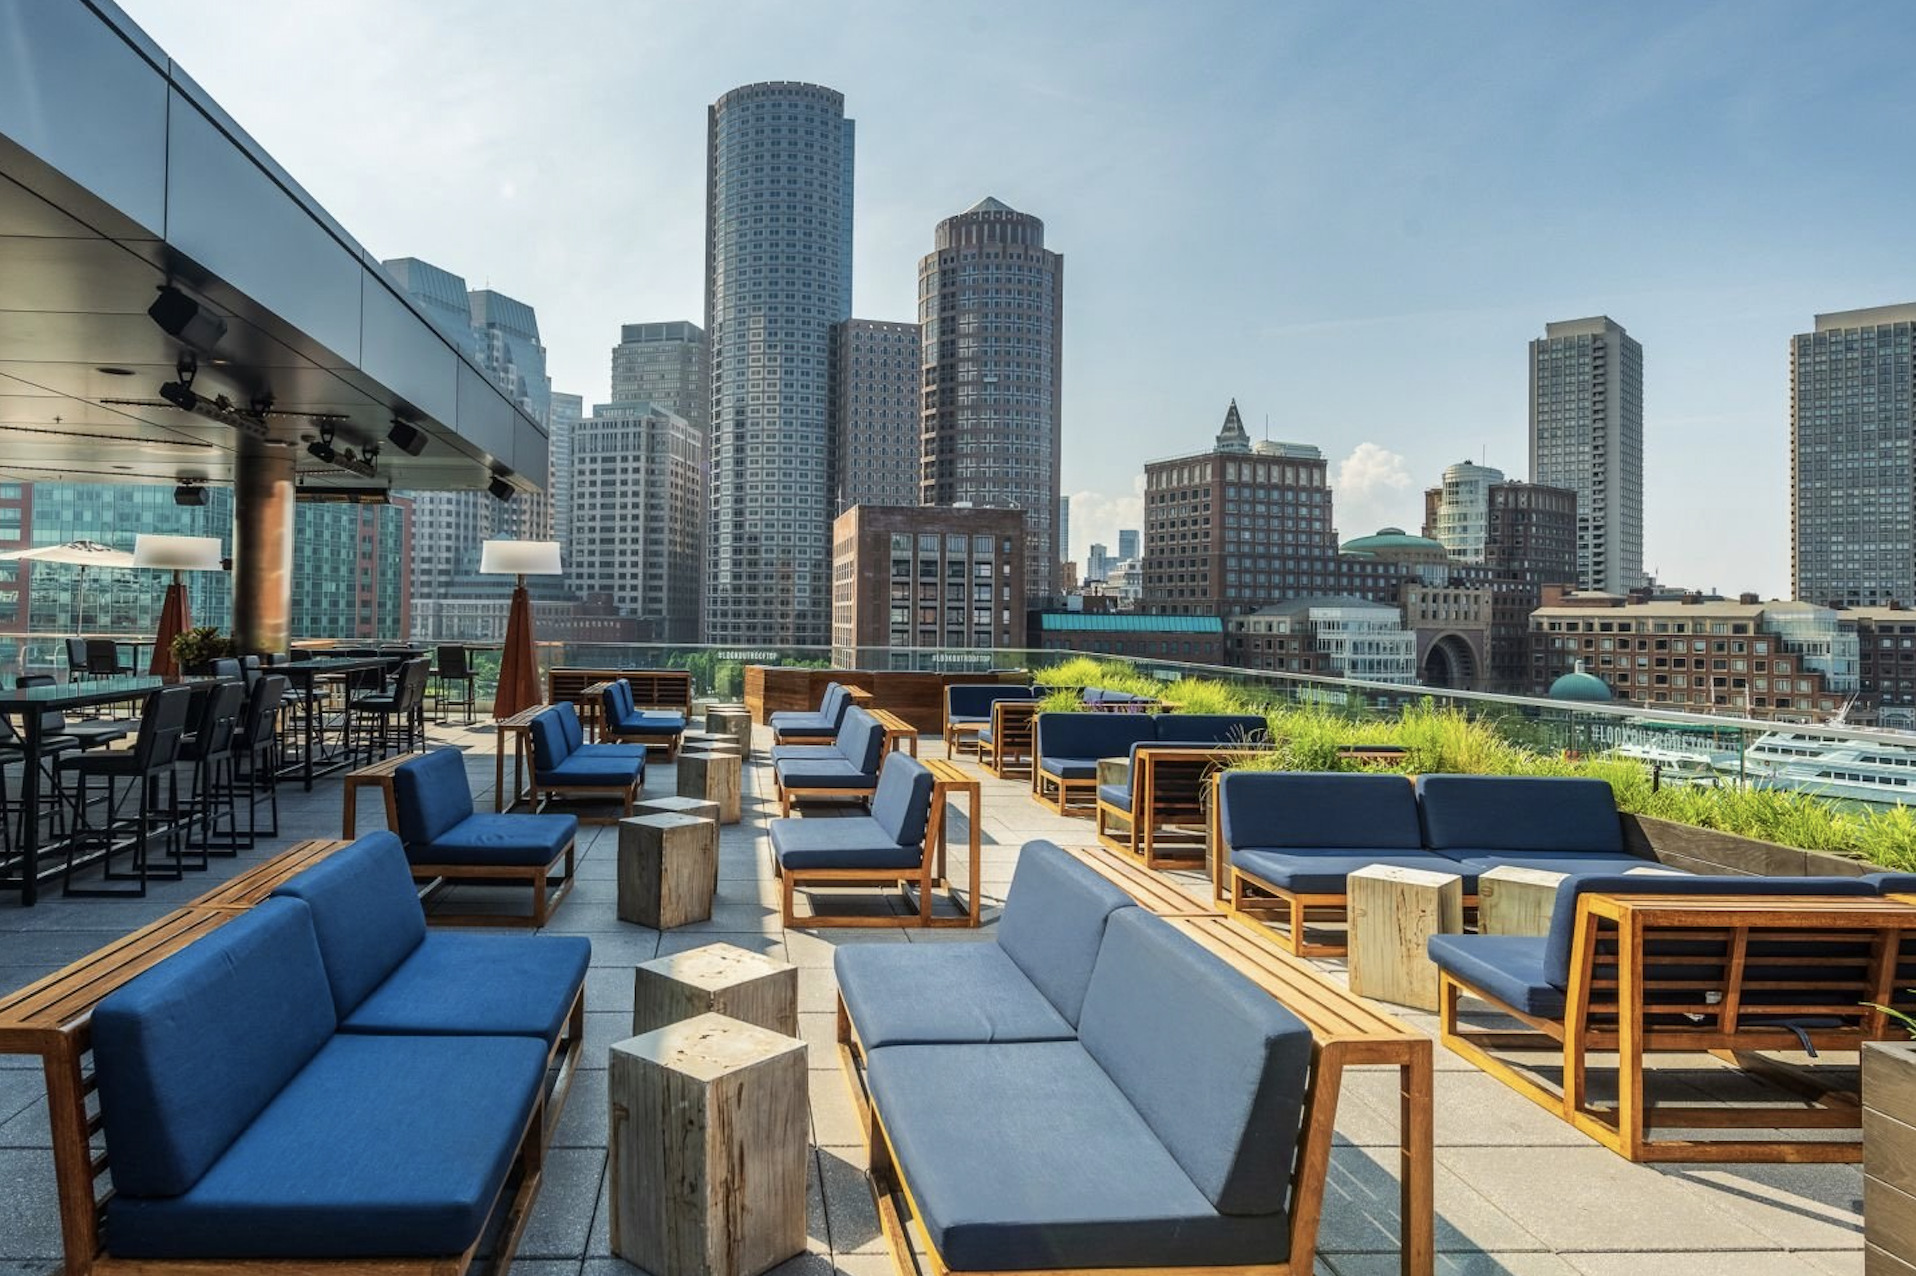 Lookout Rooftop at the Envoy Hotel in Boston with views of the city and the harbor